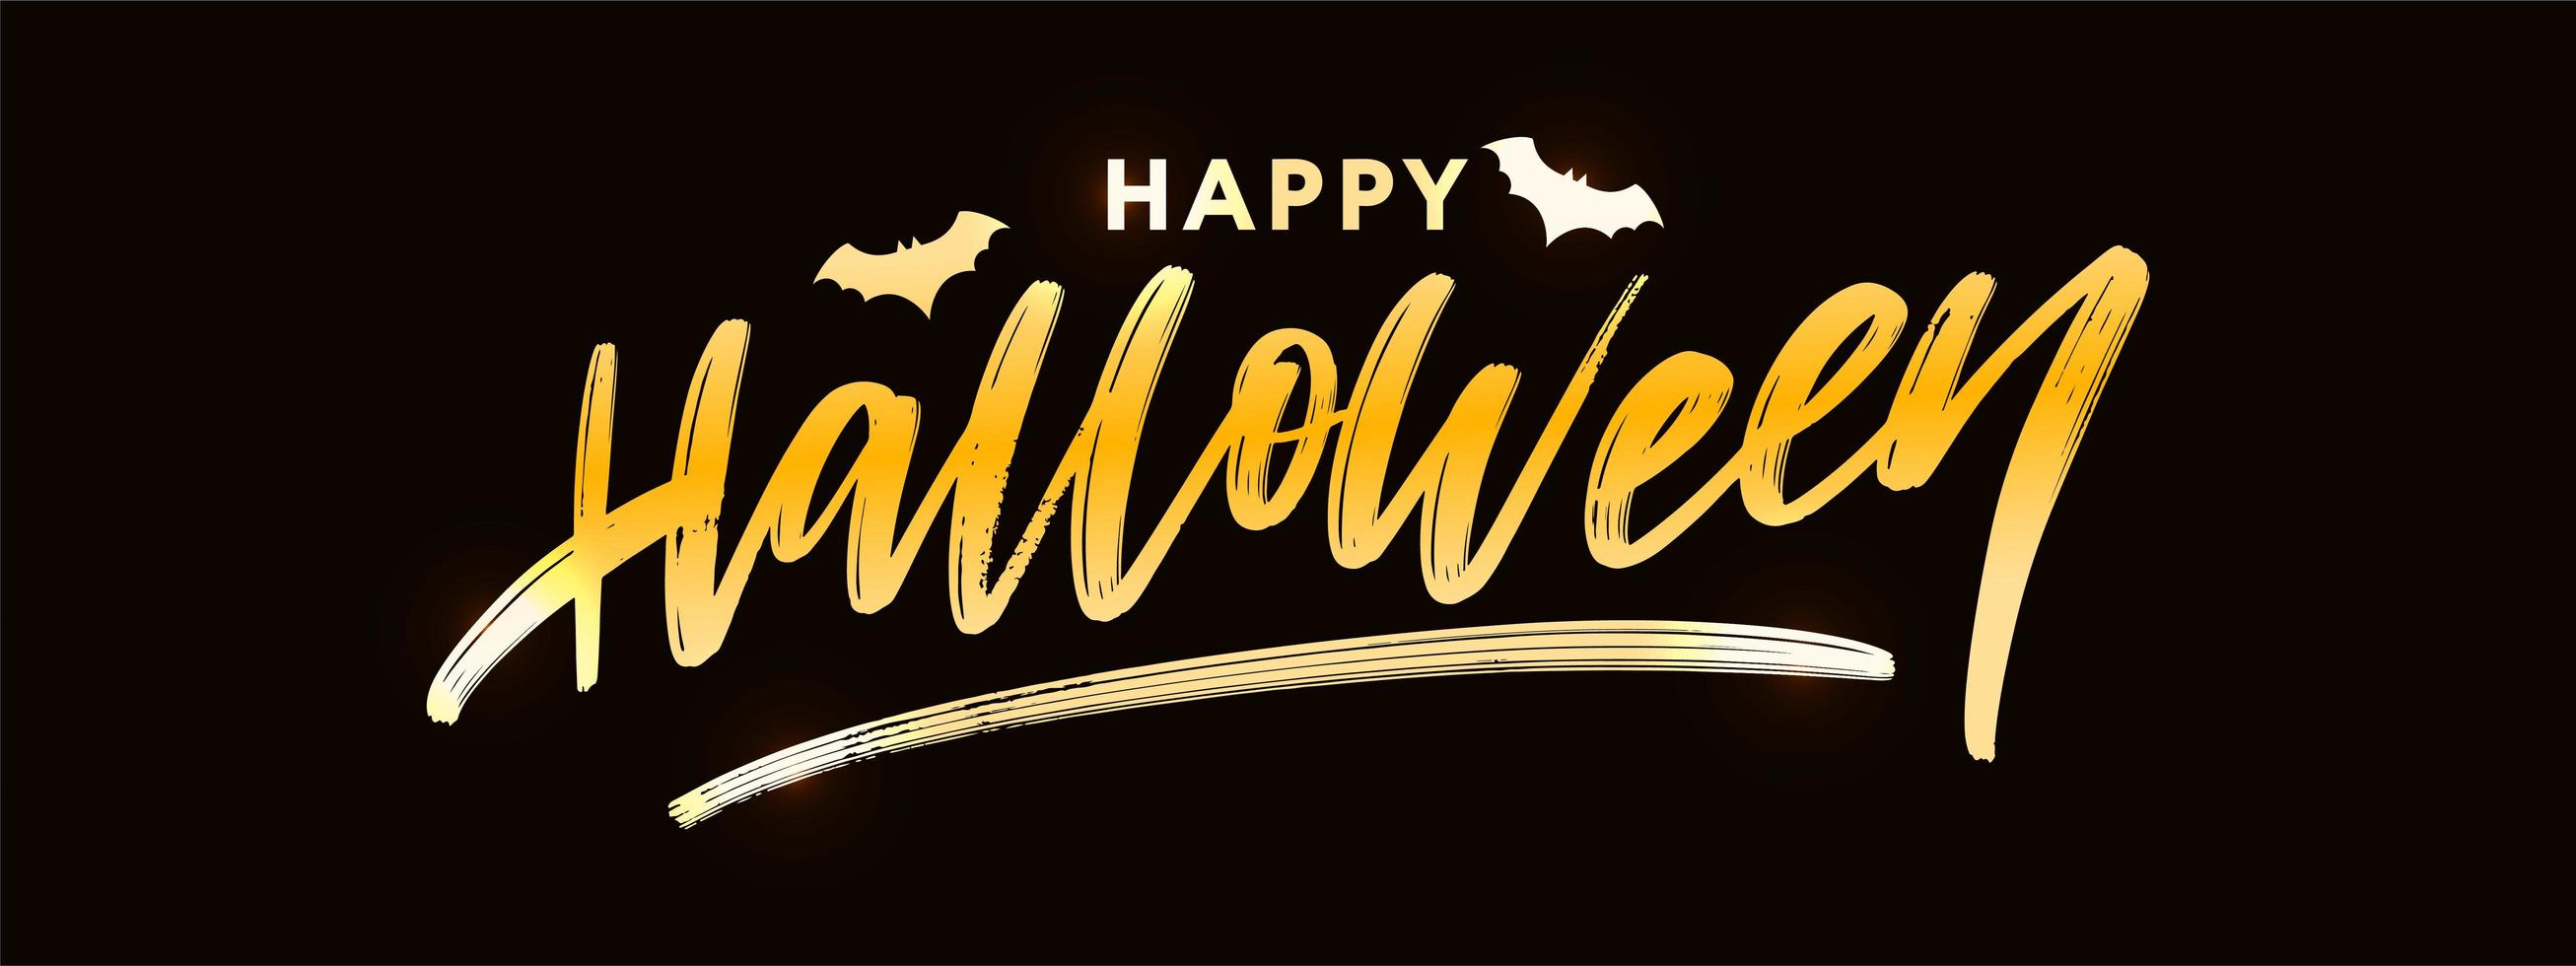 Happy Halloween Text Banner Lettering Holiday Special offer Shop Now vector